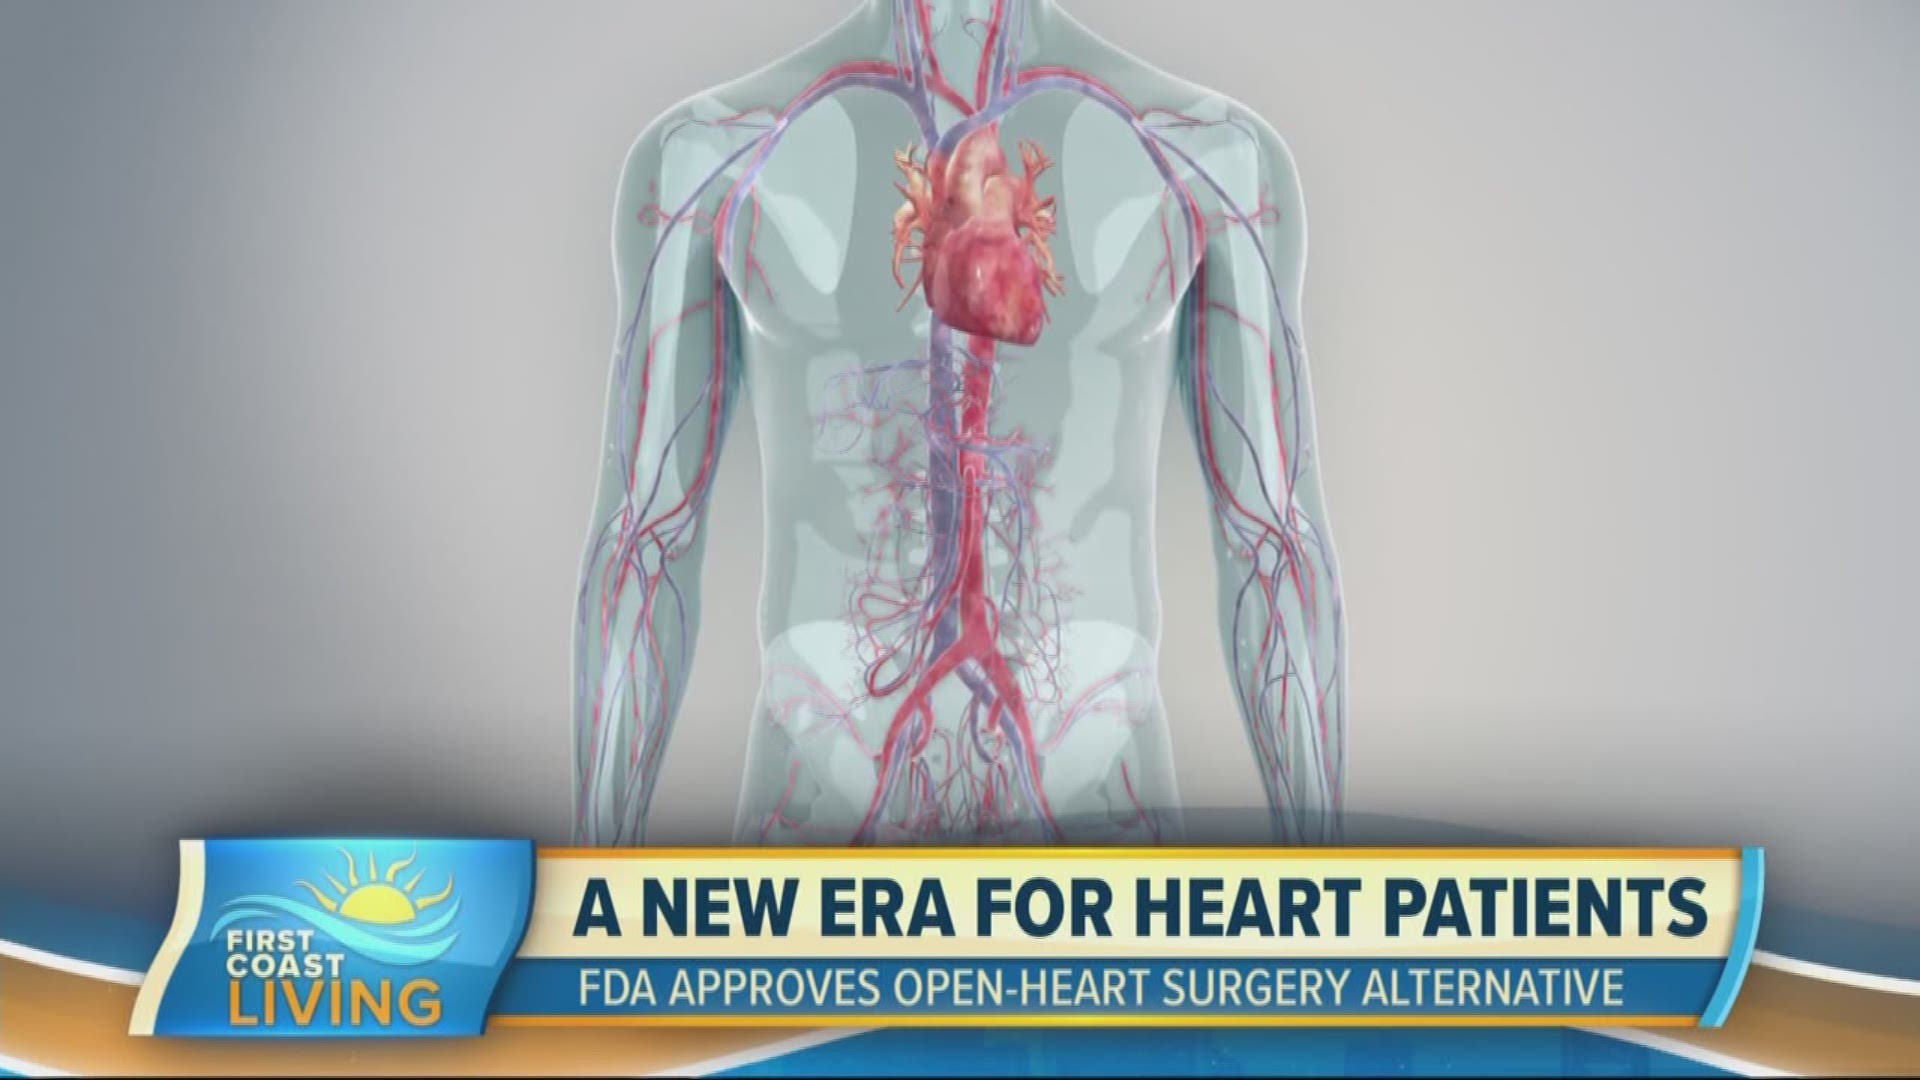 FDA Approval Means Growing Number of Patients Will Have Access to Minimally Invasive Alternative to Open-Heart Surgery.